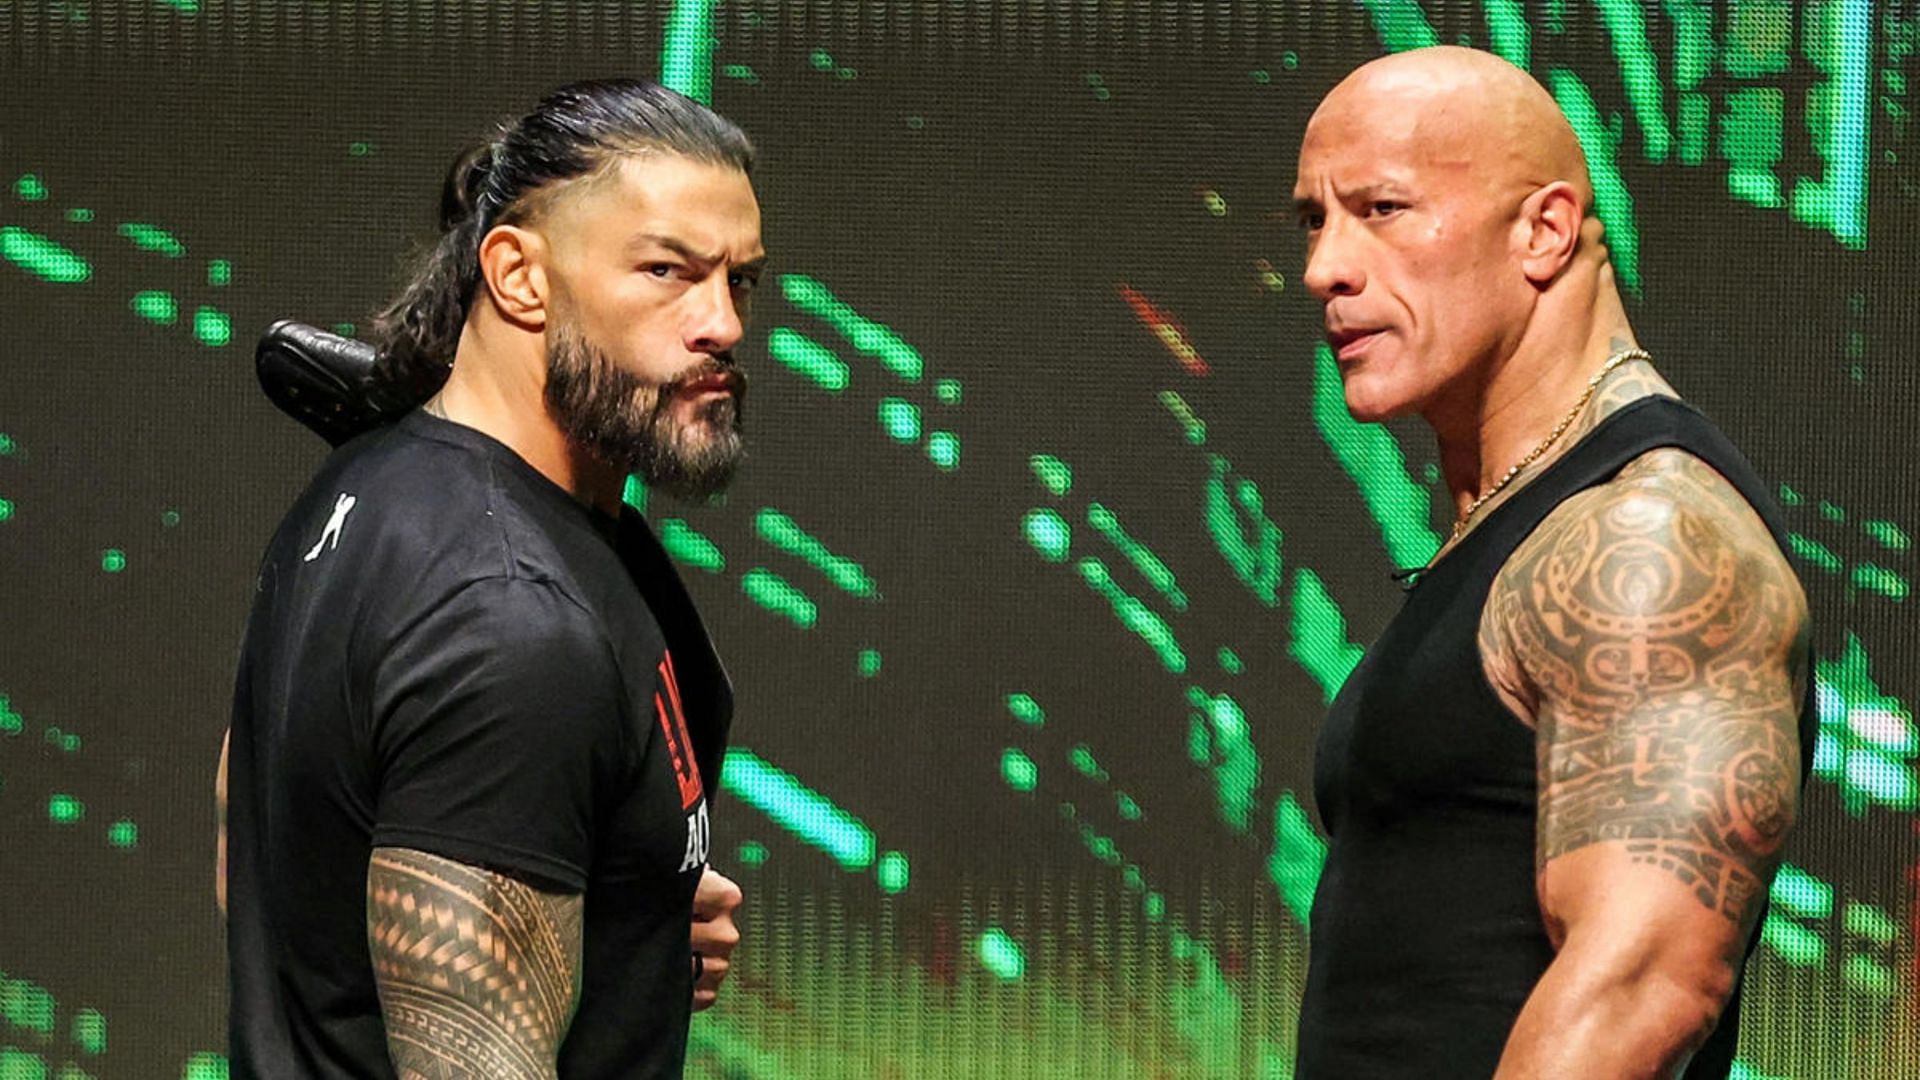 The Rock and the Undisputed WWE Universal Champion Roman Reigns